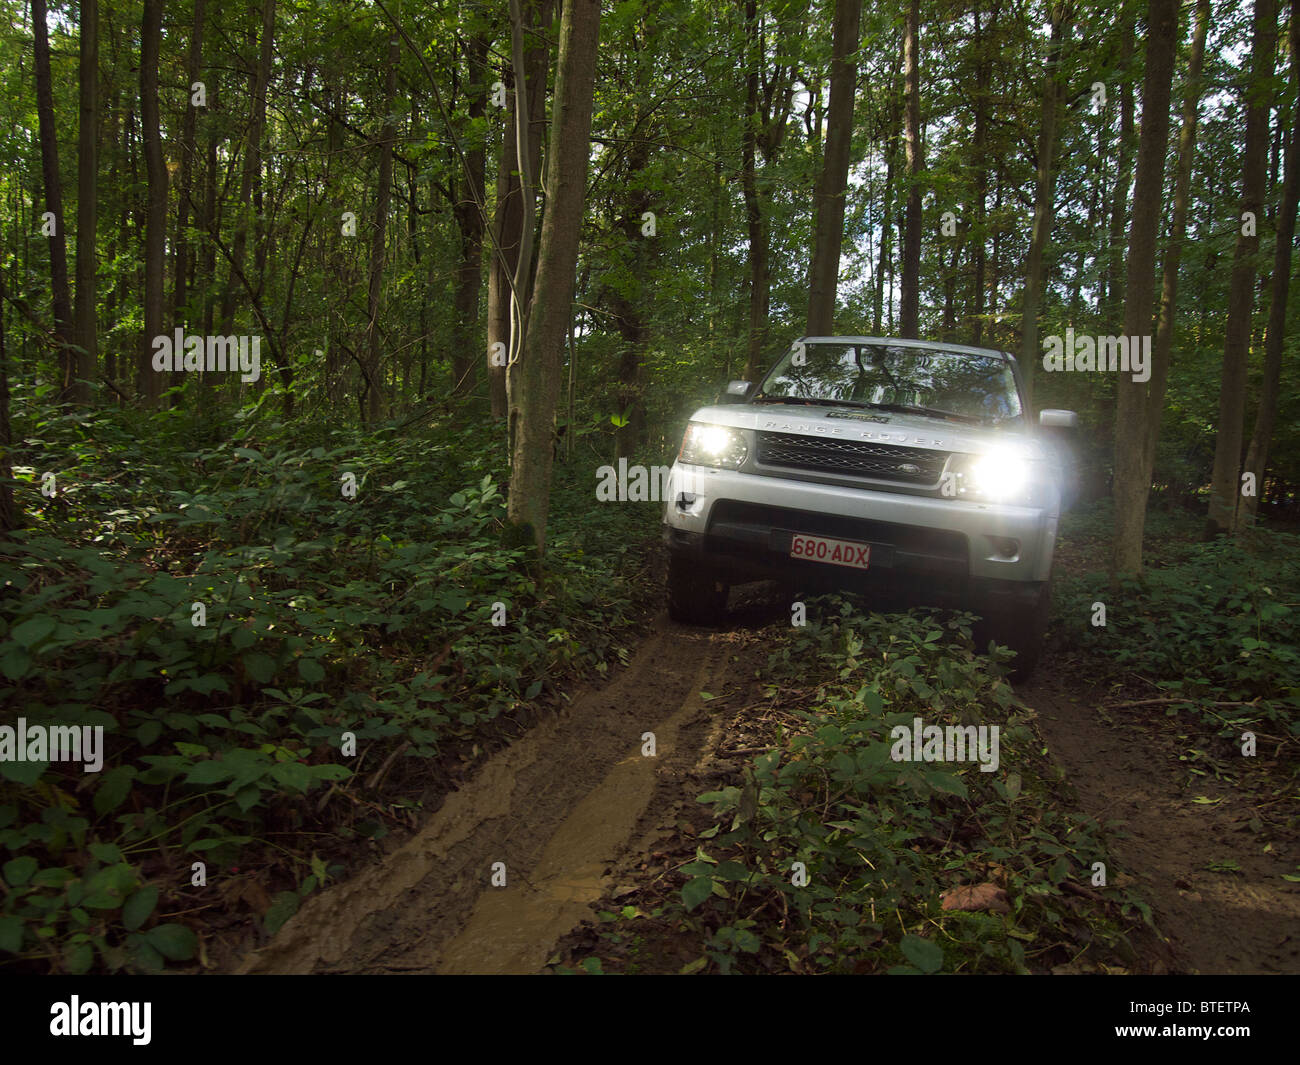 Range Rover Sport driving along a very muddy path in the forest at Domaine d'Arthey estate, Belgium Stock Photo